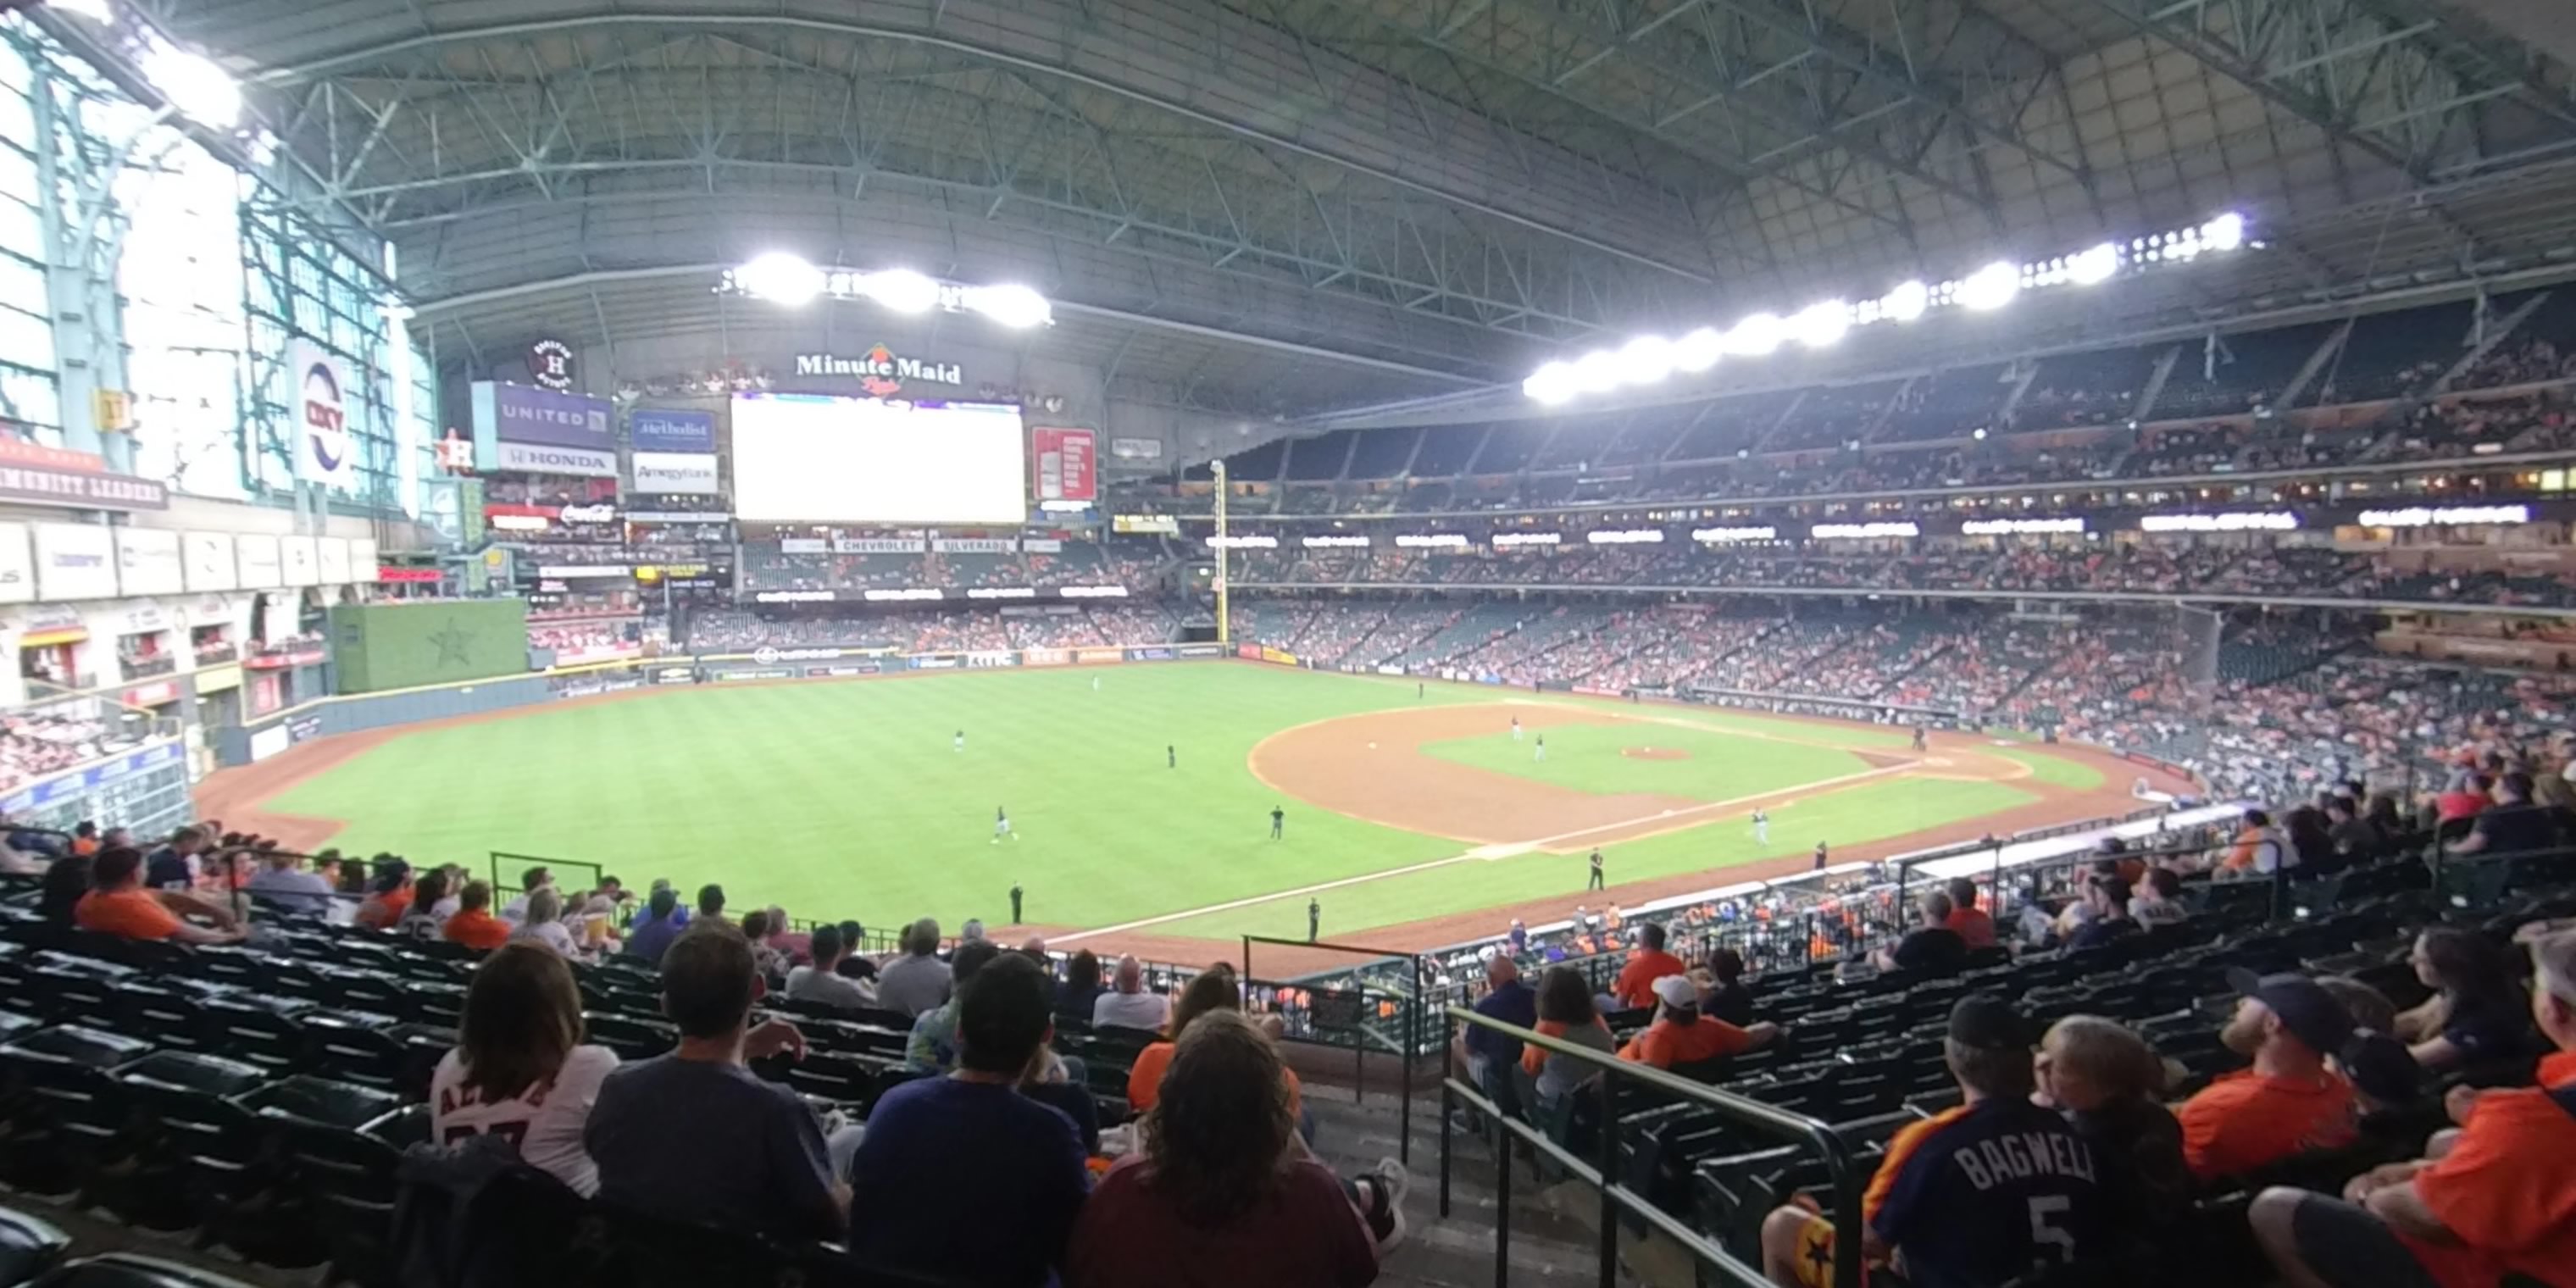 section 207 panoramic seat view  for baseball - minute maid park